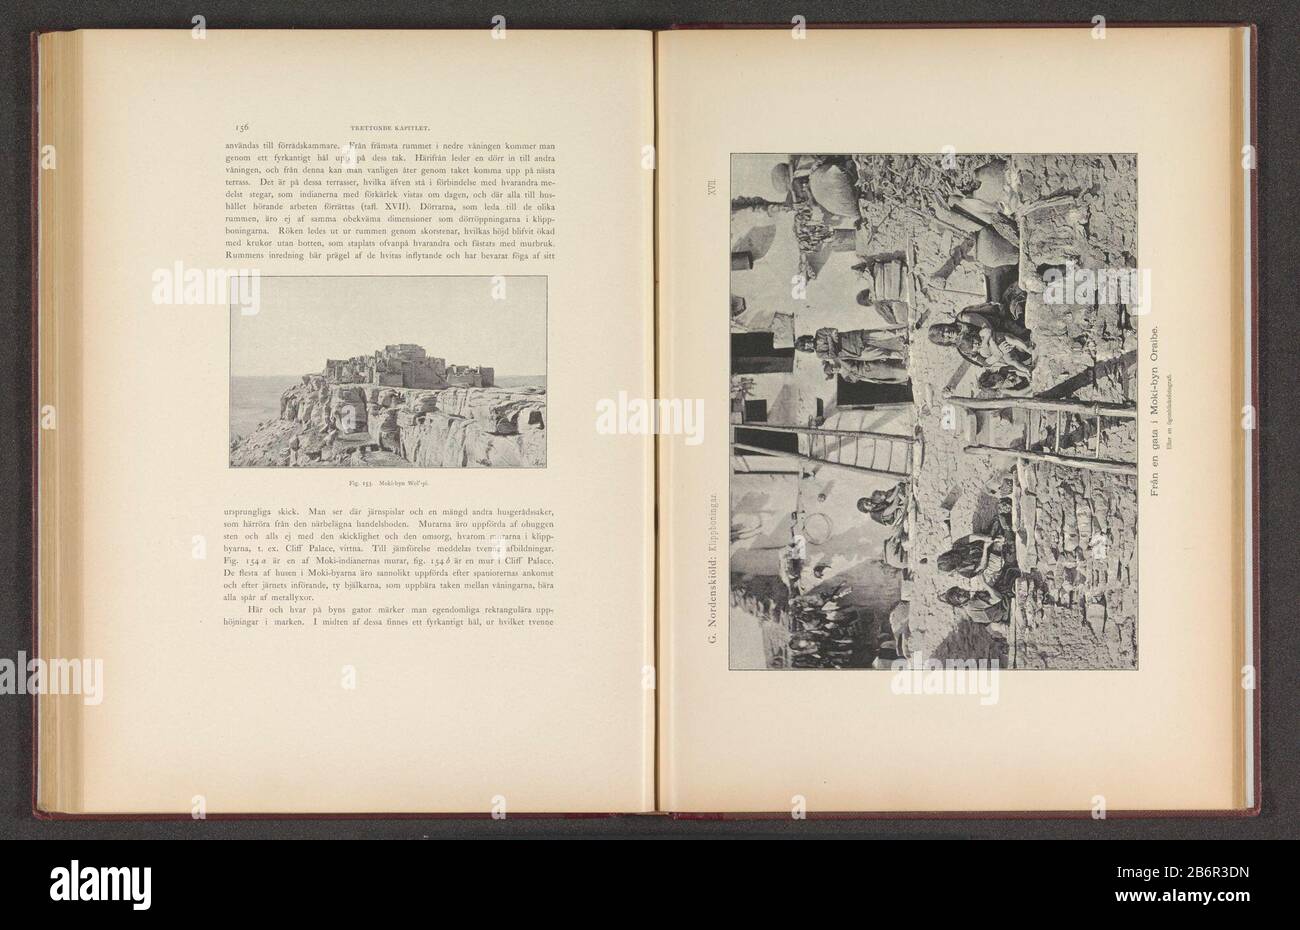 Gezicht op een dorp van het Hopi-volk Moki-byn Wol'-pi (titel op object) View of a village of the Hopi volkMoki-byn Wol'-pi (title object) Property Type: photomechanical print page Item number: RP-F 2001-7-1466-76 Inscriptions / Brands: number, recto, printed: 'Fig. 153.'naam, recto, printed: Initials, possibly AG ph Manufacturer : Photographer: Gustaf Nordenskiöld (possible) clichémaker: C. Angerer & Göschl (listed property) Place manufacture: photographer: North and Central Amerikaclichémaker: Vienna Date: ca. 1891 - or for 1893 Material: paper Technique: autotypie Dimensions: print: h 90 mm Stock Photo